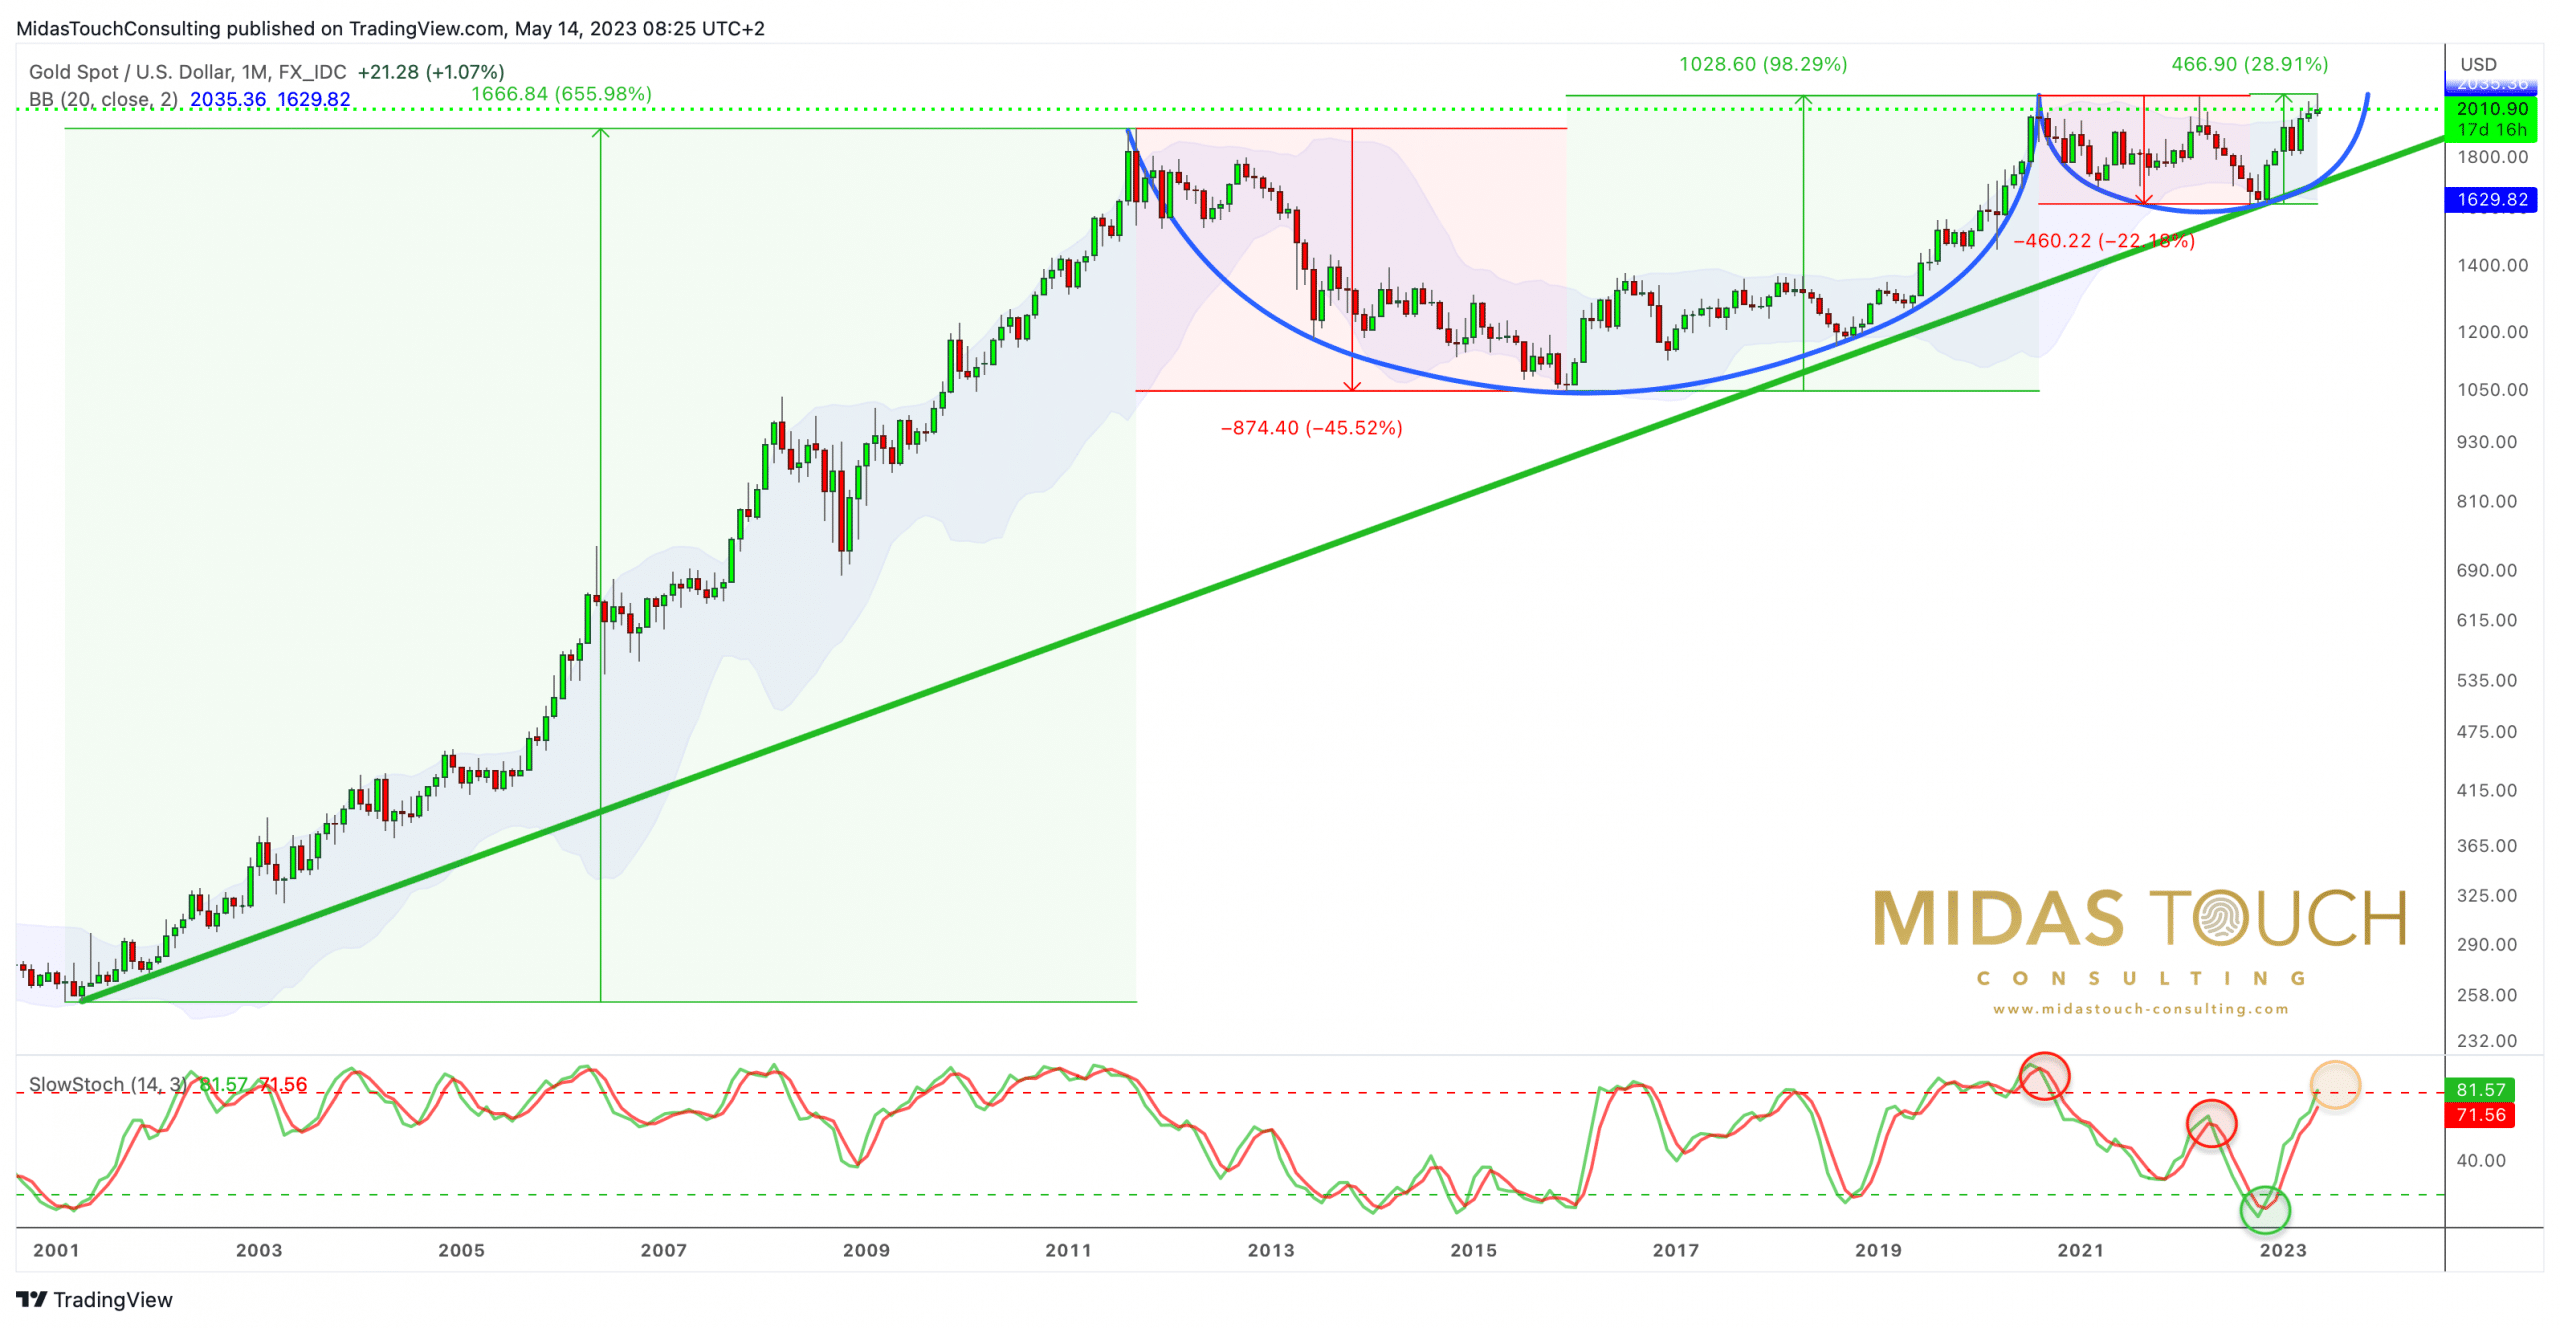 Gold in US-Dollars, monthly chart as of May 13th, 2023. Source: Tradingview. May 14th, 2023: The Midas Touch Gold Model™ Update